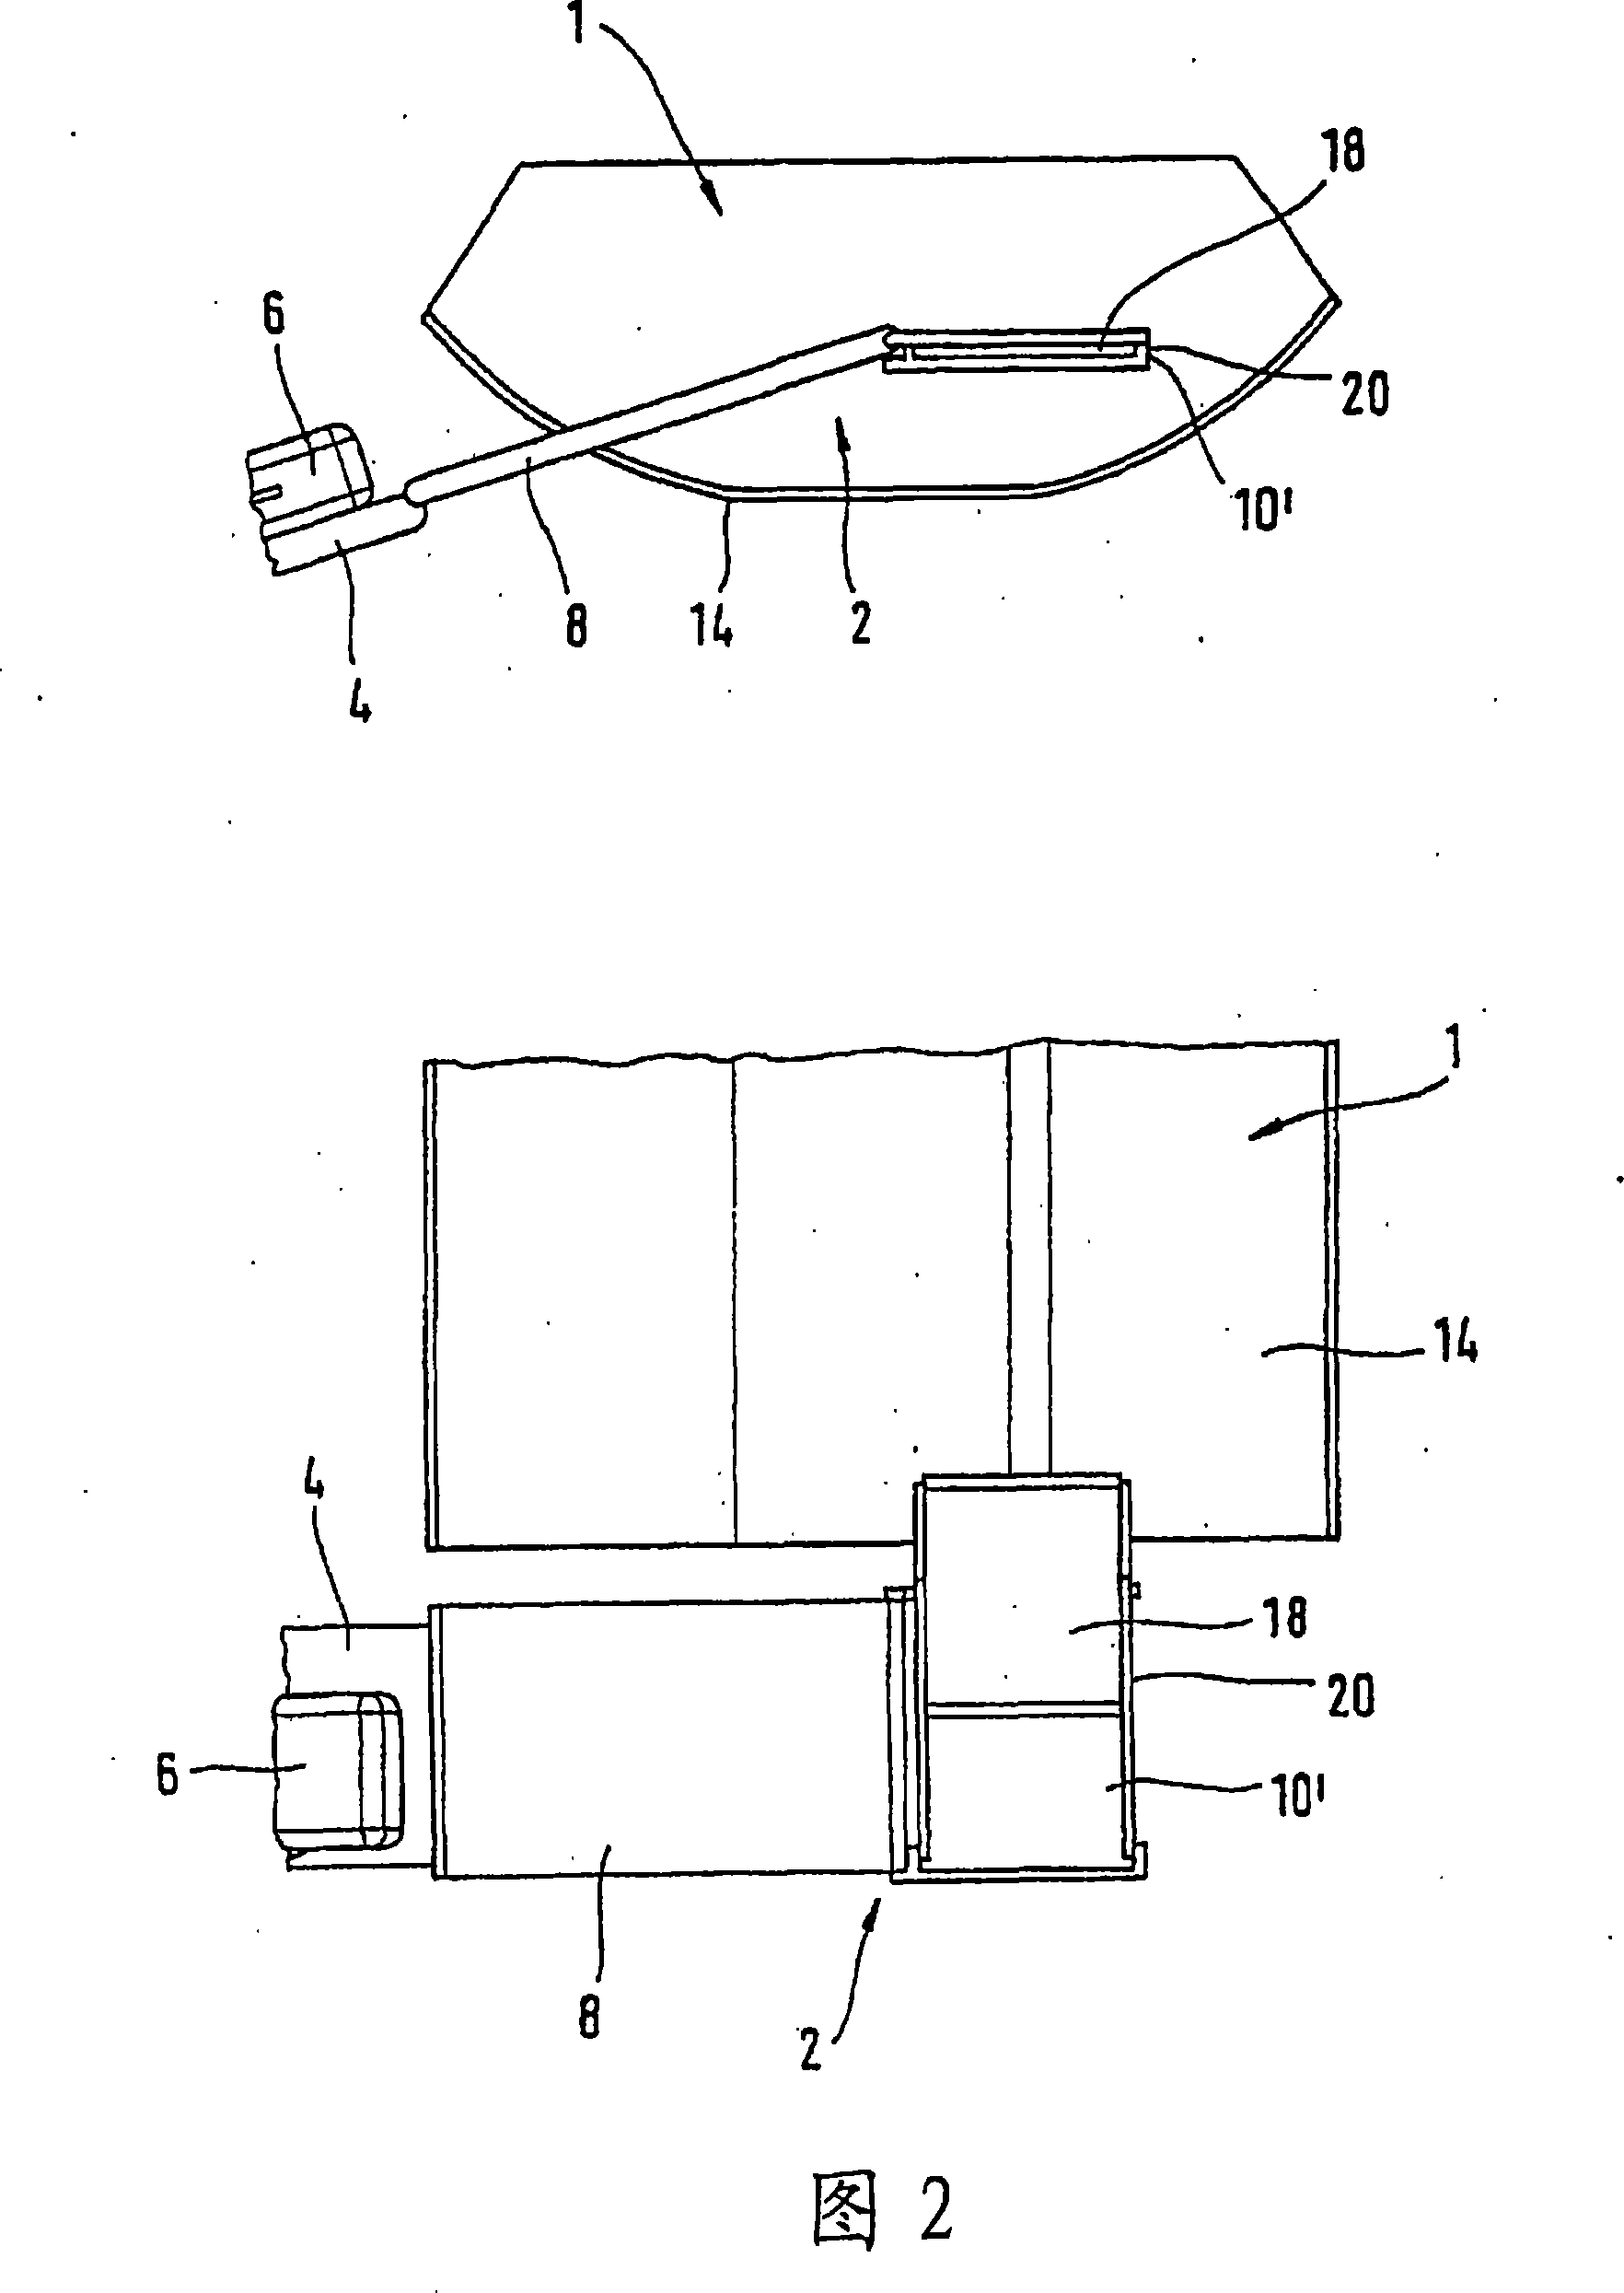 System for loading and unloading unpakced cargo and intermediate transport device or unit